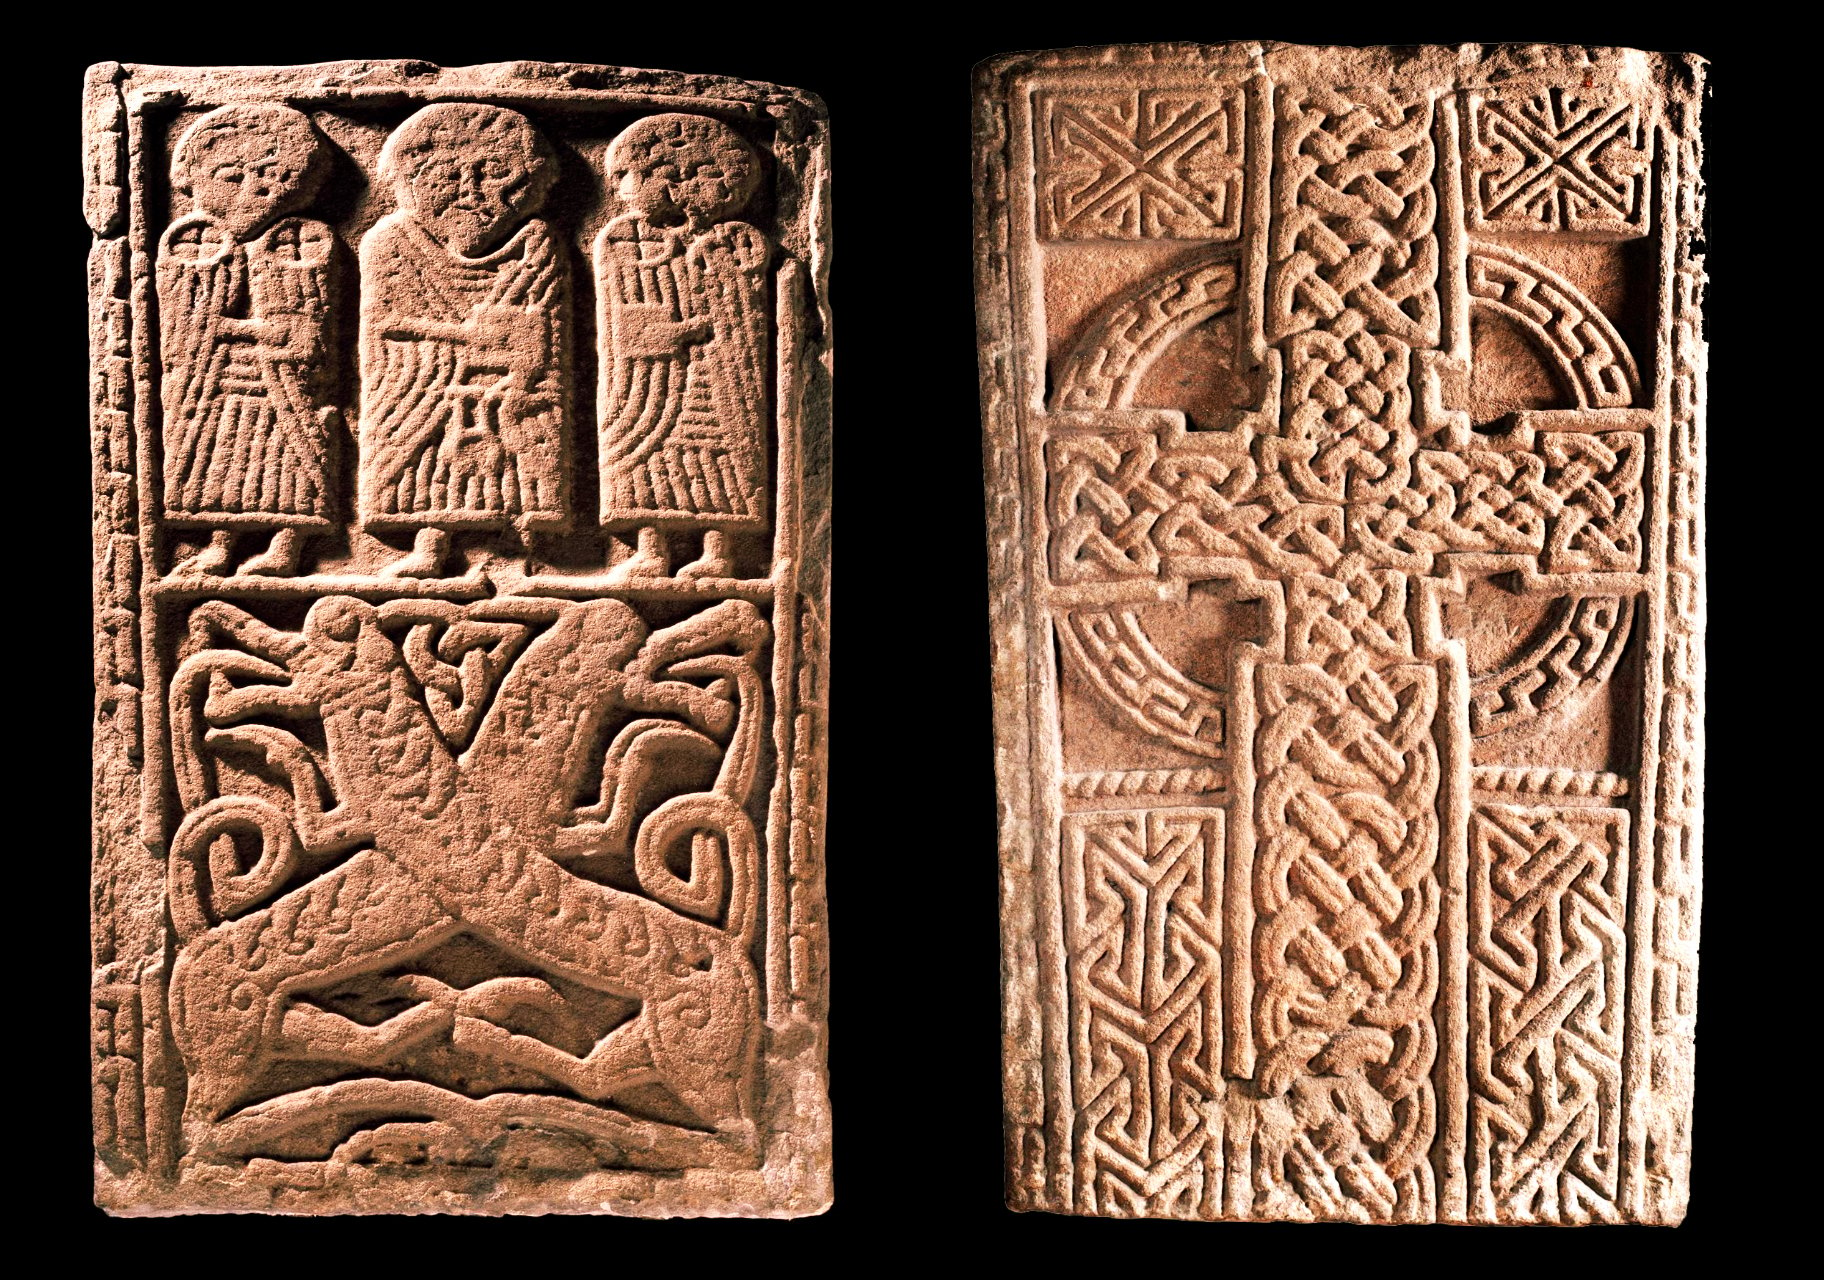 Late 9th-century Pictish sandstone slab from Invergowrie Church, Angus, featuring a ringed cross on one side and three depicted figures on the other.